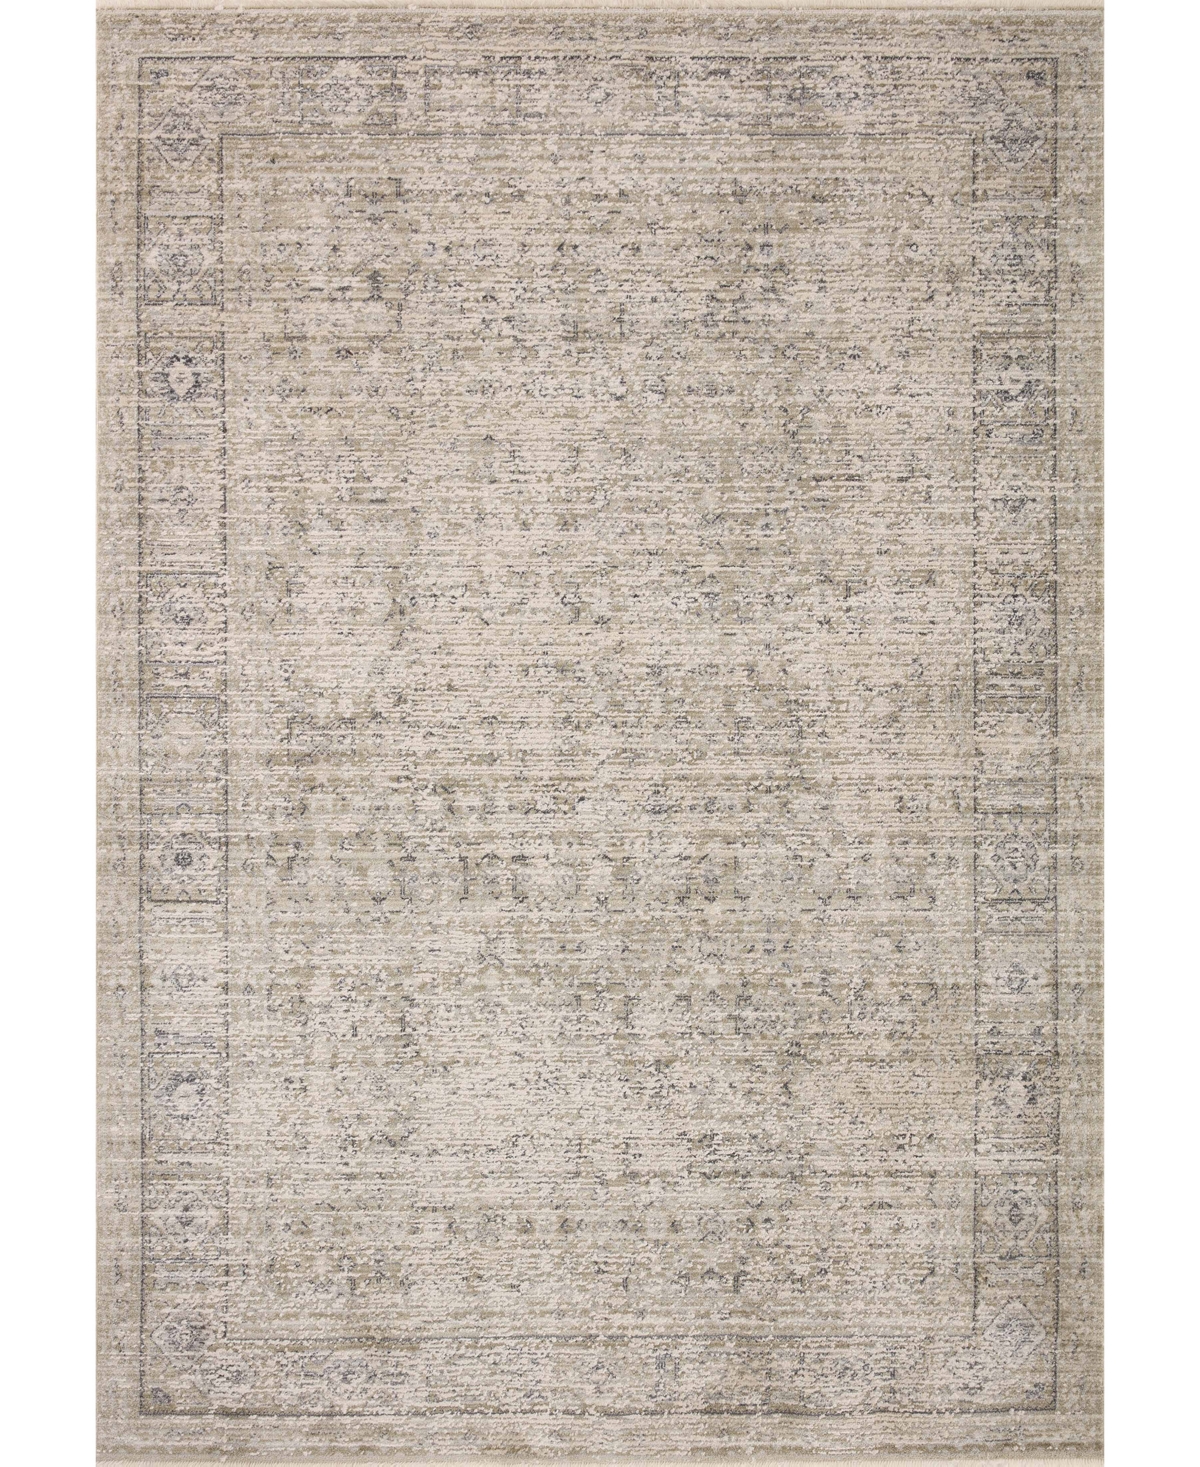 Amber Lewis X Loloi Alie Ale-03 7'10" X 10' Area Rug In Taupe,gray